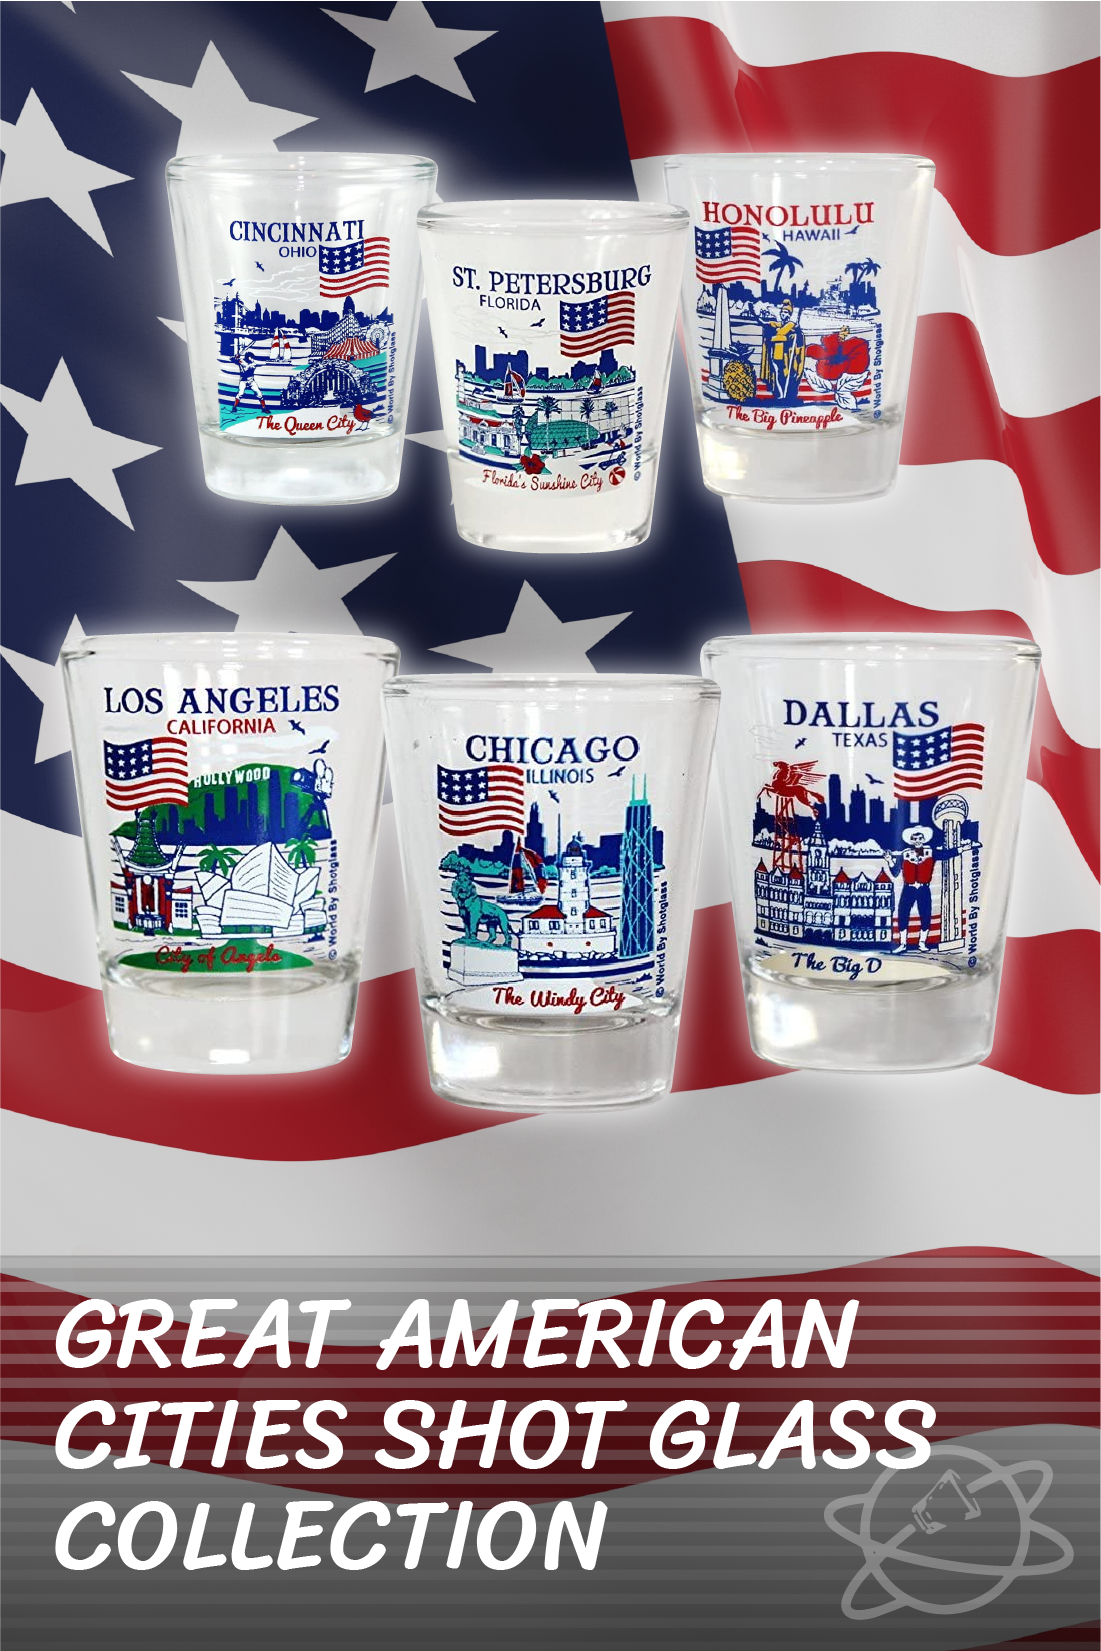 Great American Cities Shot Glass Collection